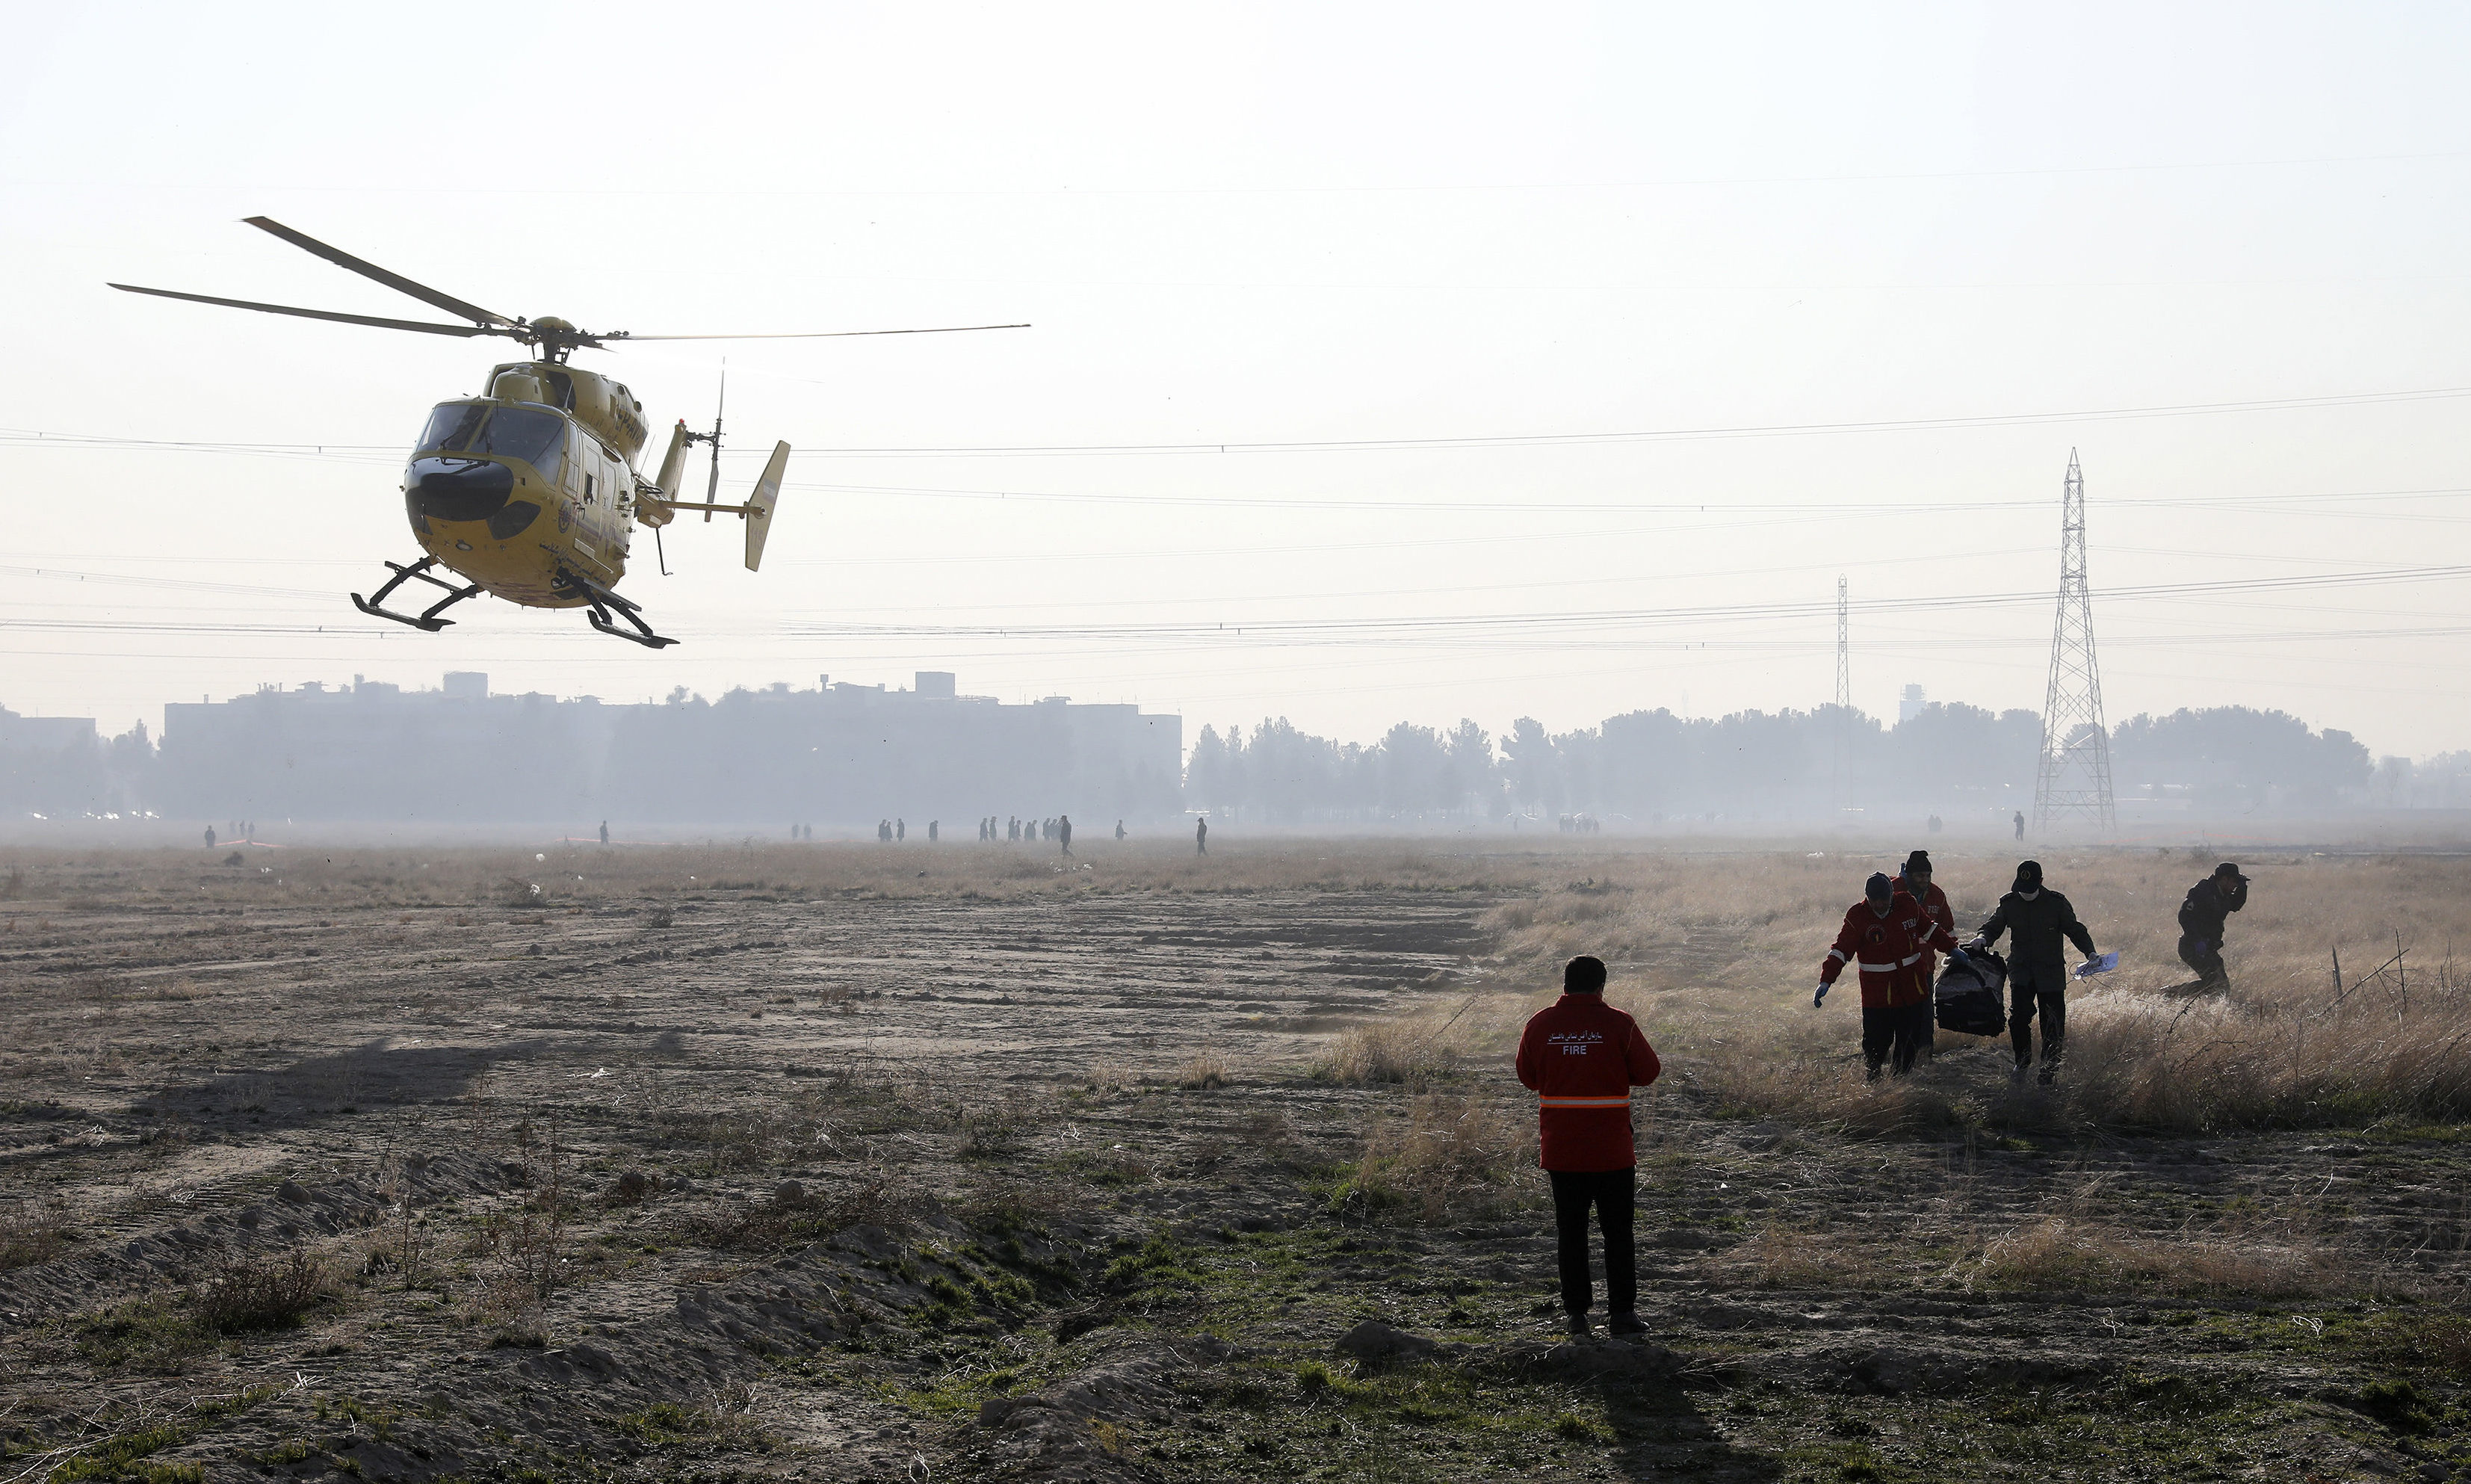 A rescue team work at the scene where an Ukrainian plane crashed in Shahedshahr, southwest of Tehran, Iran.